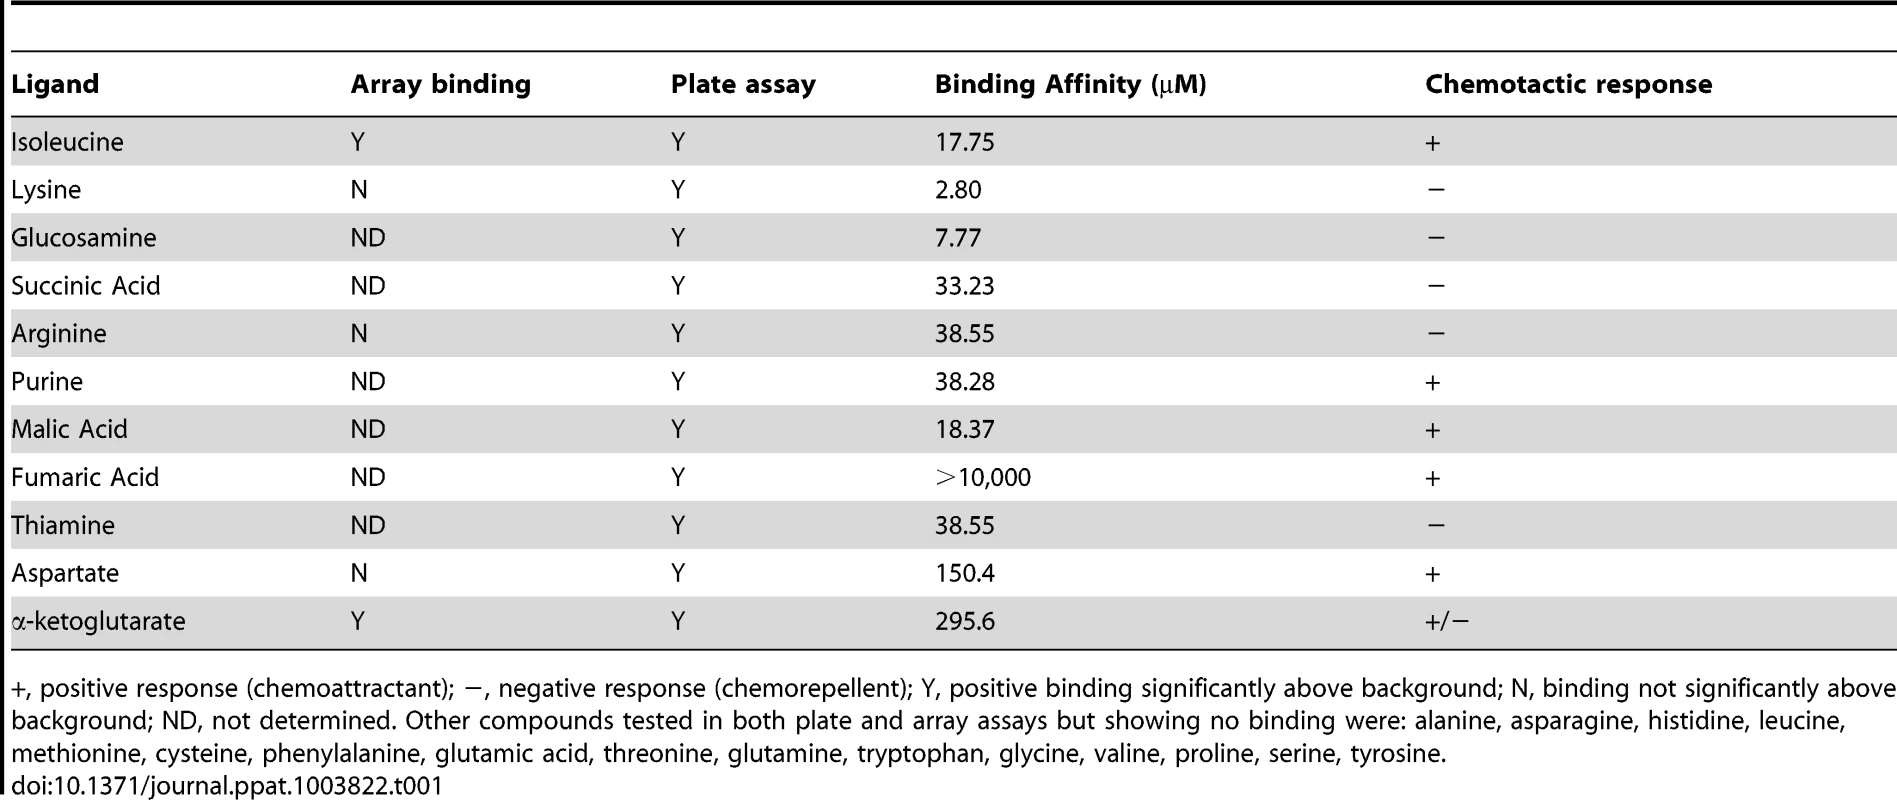 Summary of ligand binding and chemotactic response.